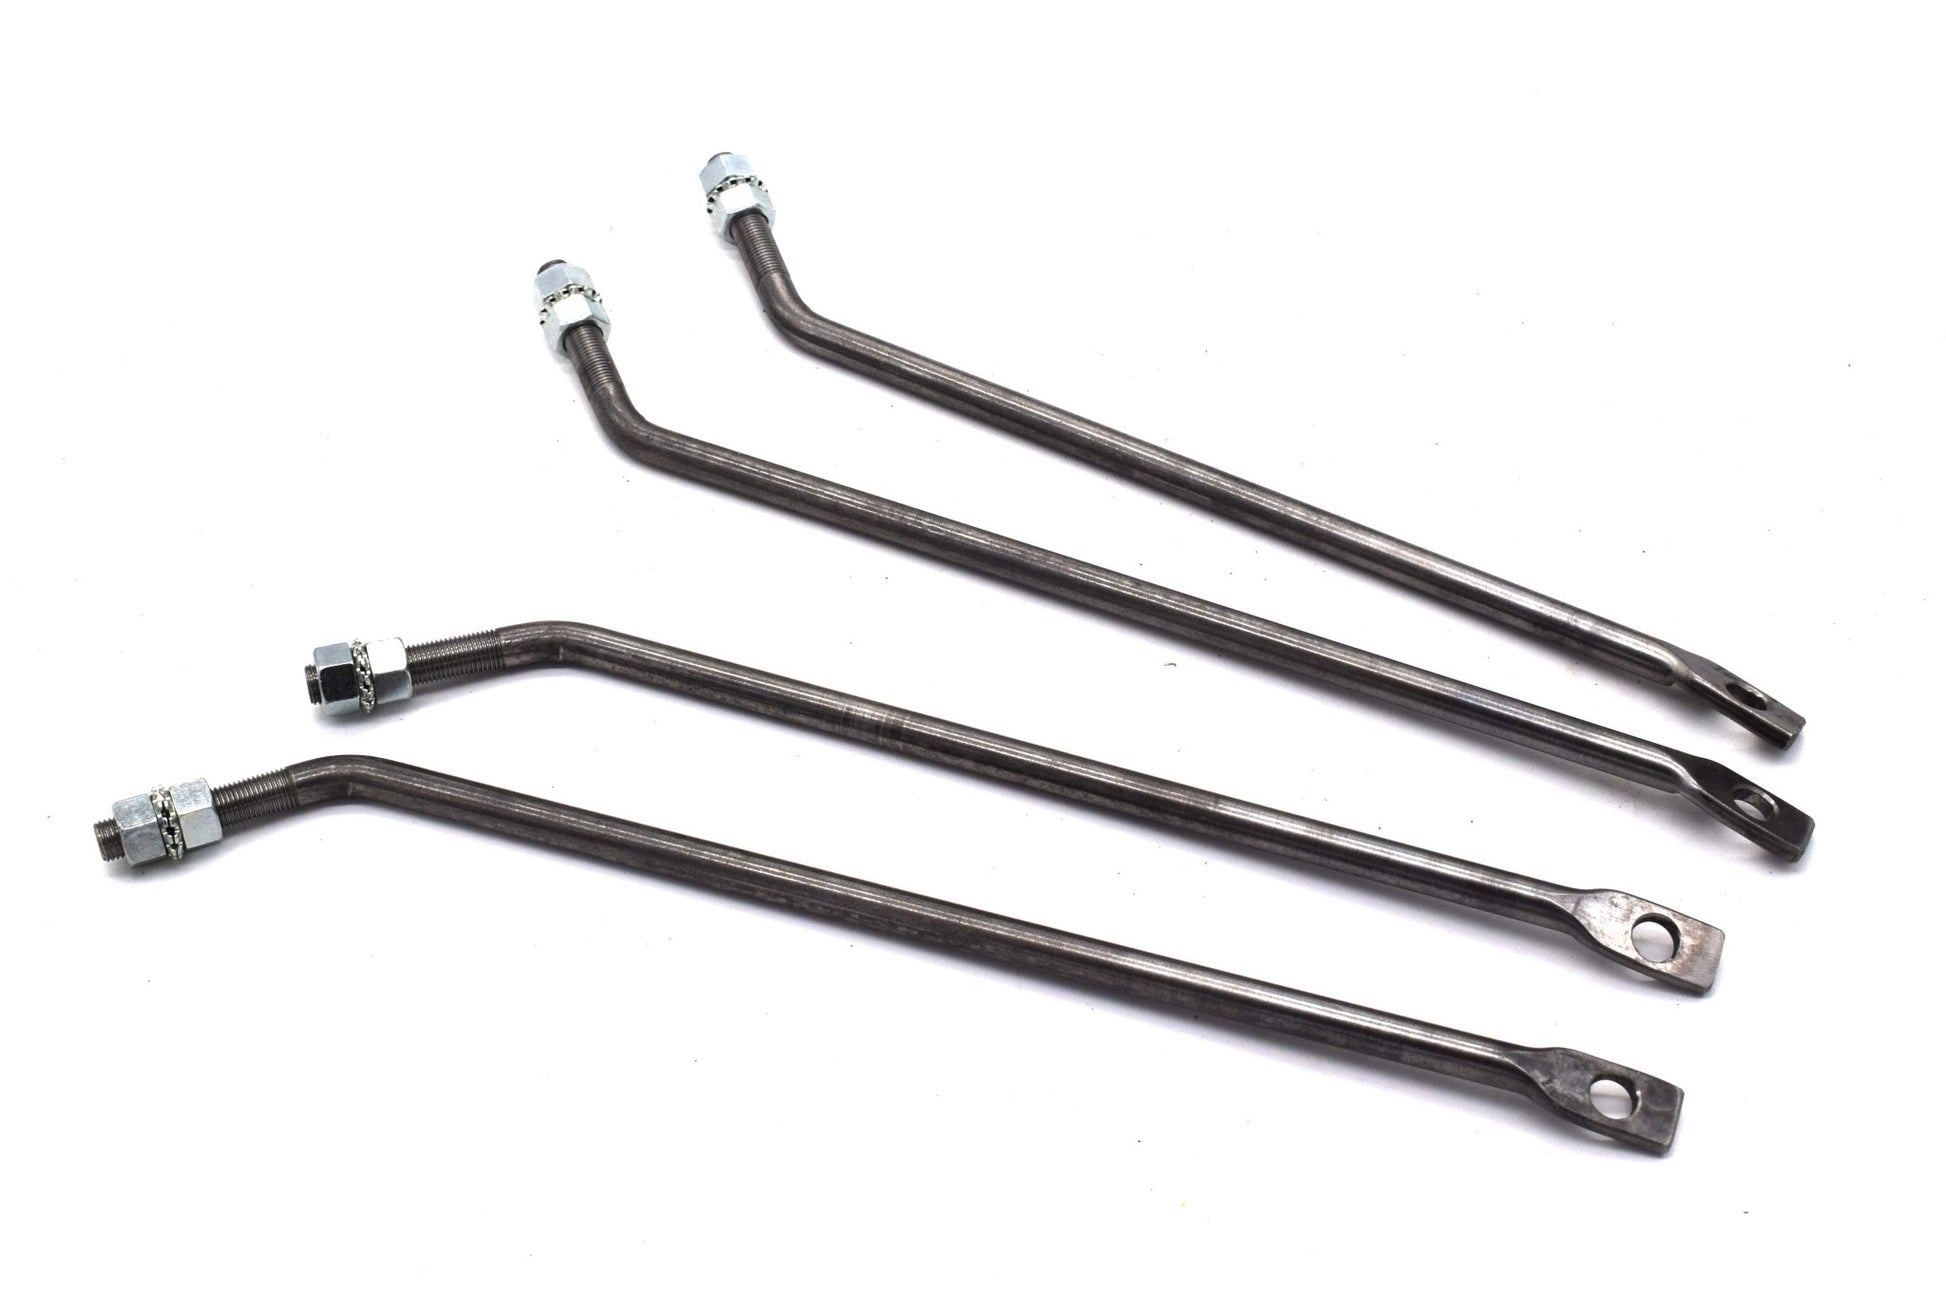 Rear Fender Rod Support Set, 1947-1963, Willys Pick Up Truck - The JeepsterMan